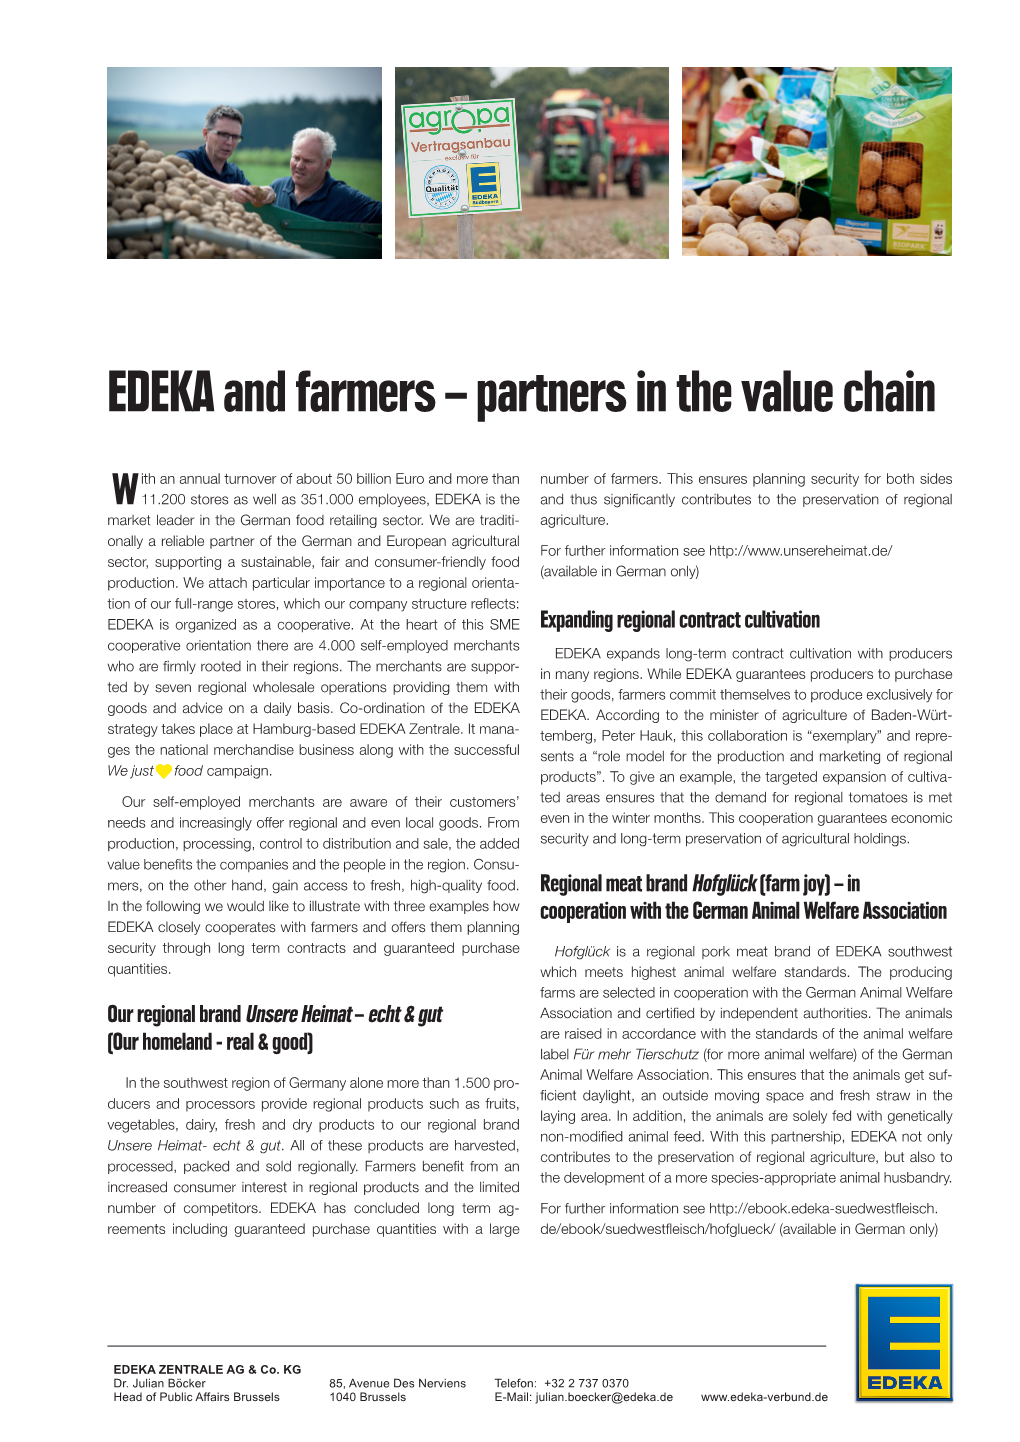 EDEKA and Farmers – Partners in the Value Chain